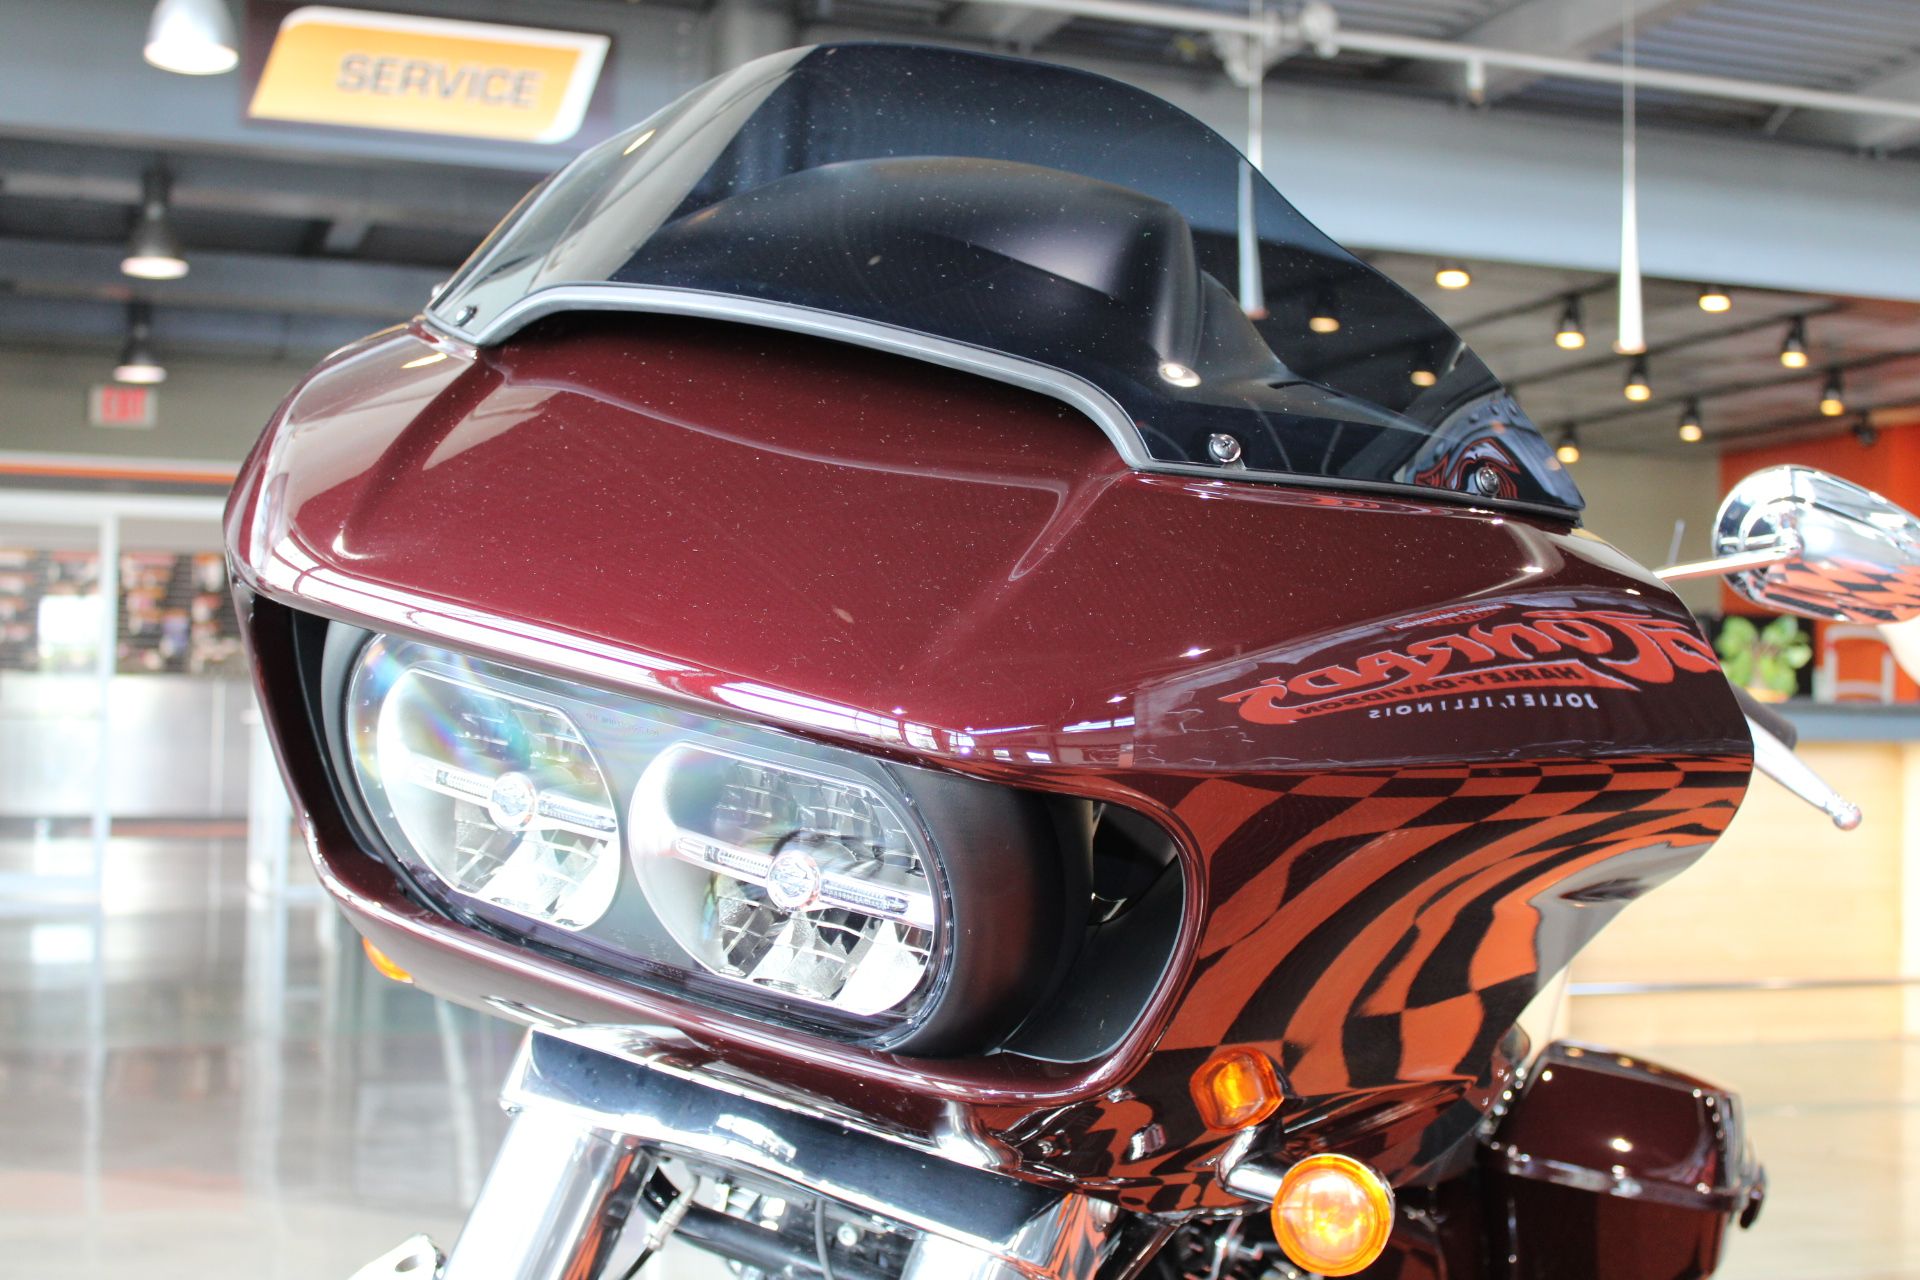 2021 Harley-Davidson Road Glide® Special in Shorewood, Illinois - Photo 18